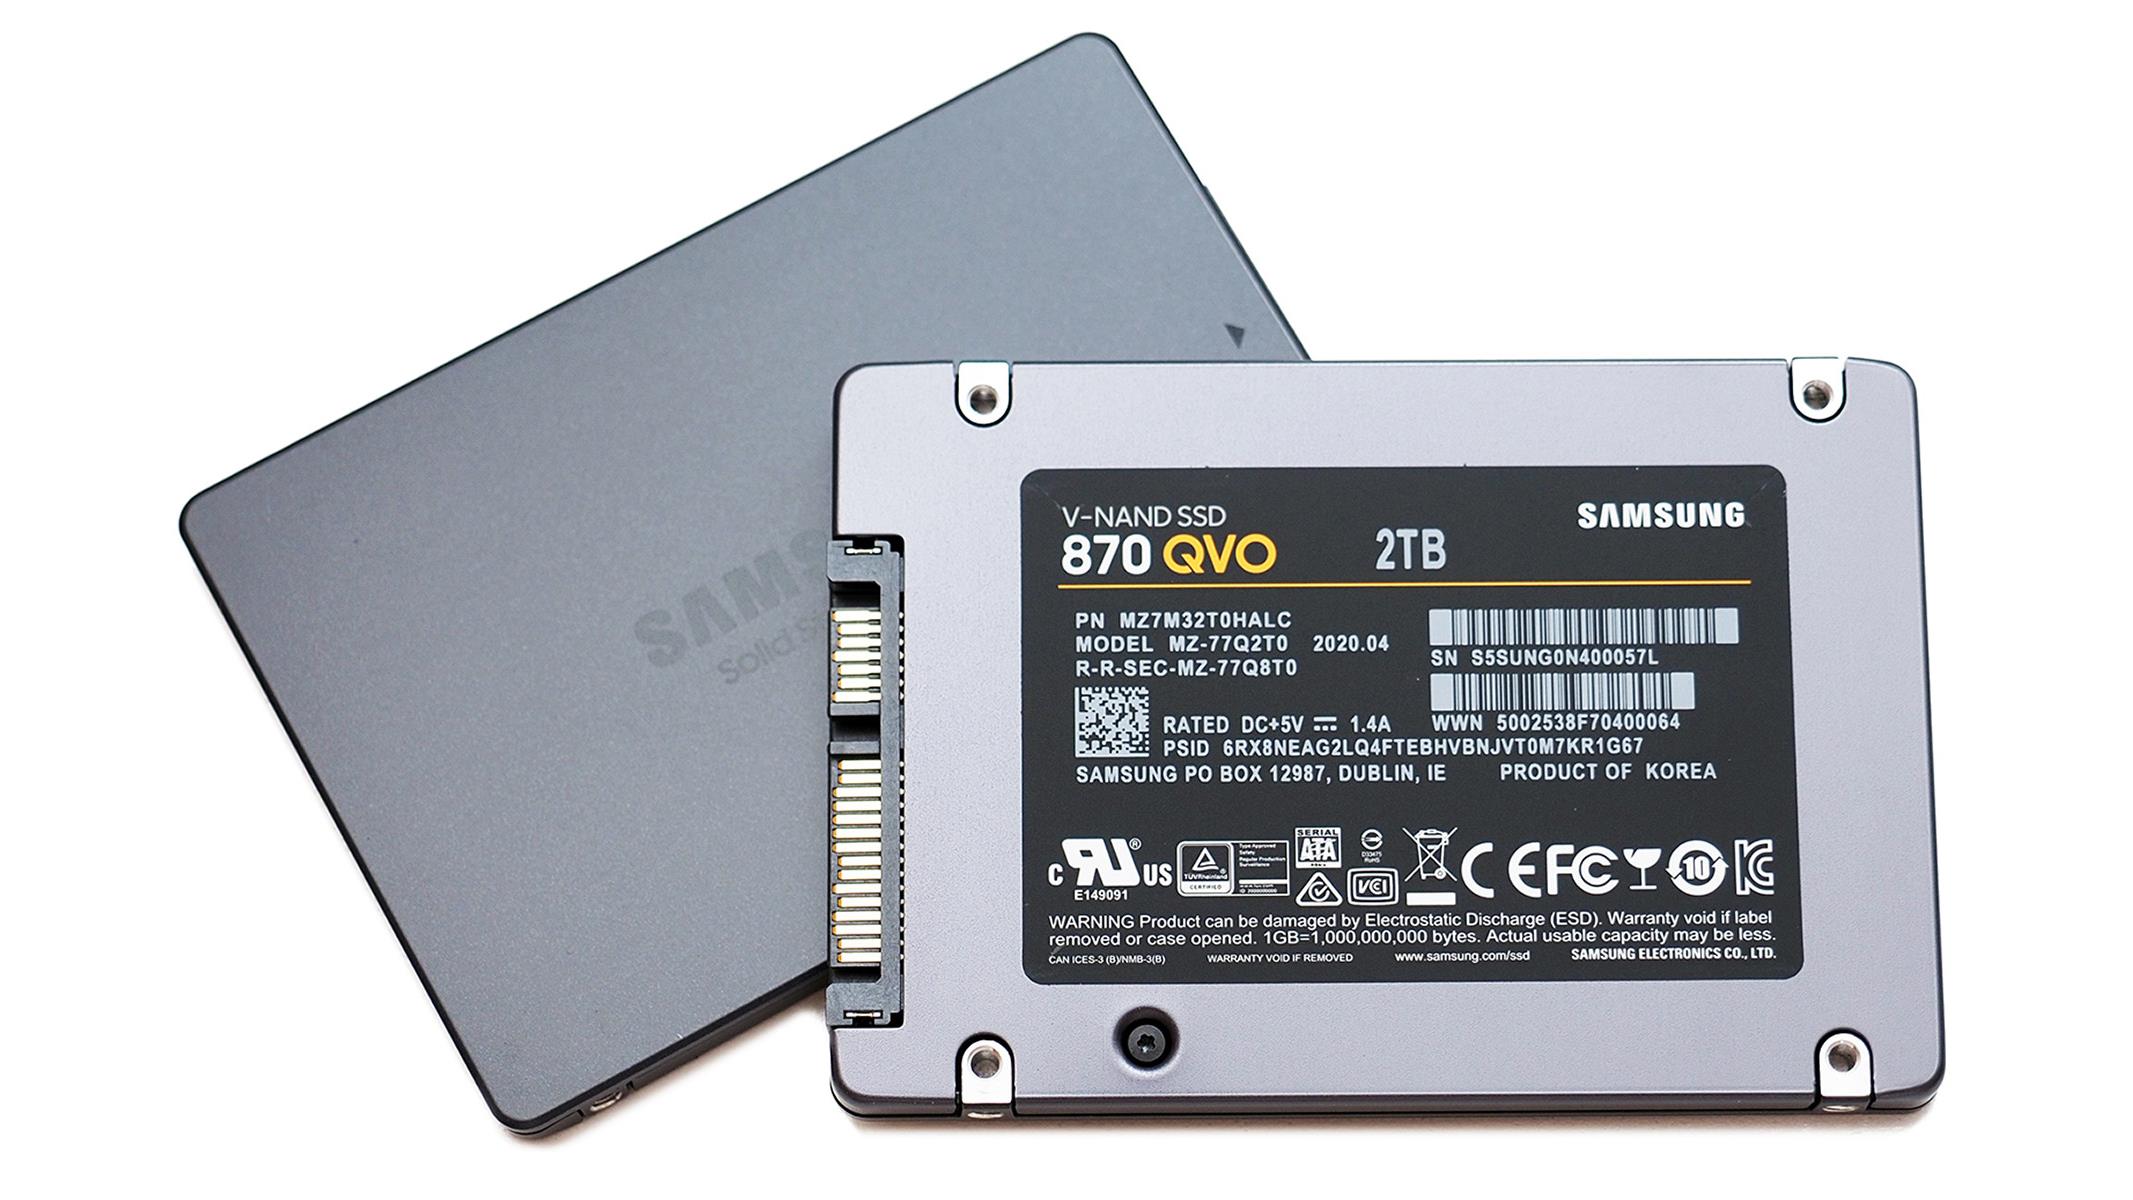 Samsung SSD 870 QVO 2TB SSD Falls To Just $199, Apple AirPods Pro